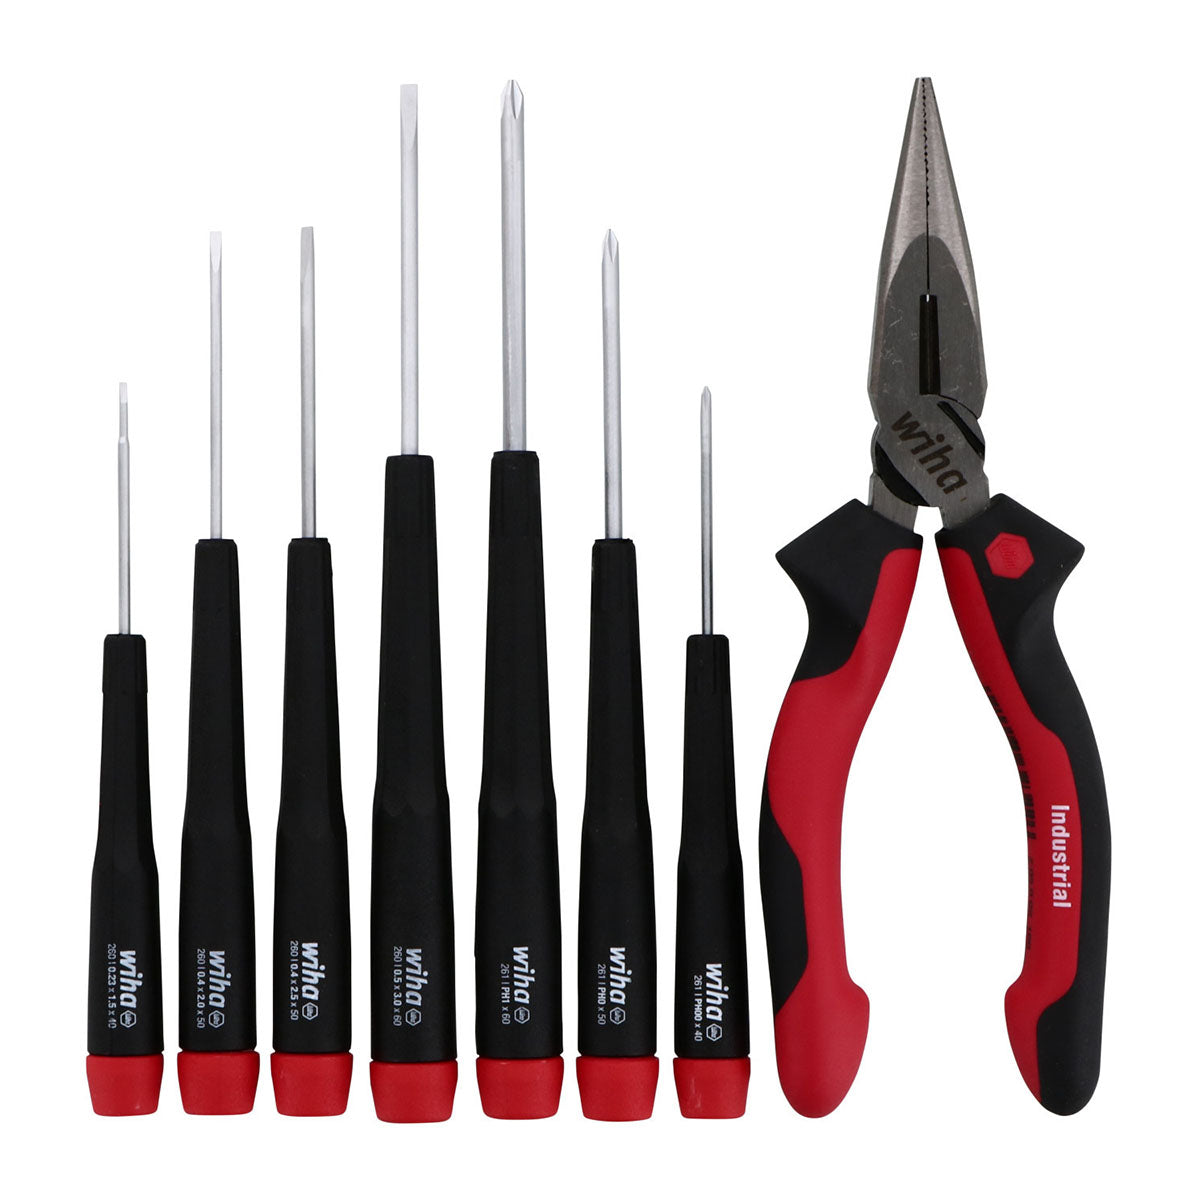 Wiha Precision Slotted Phillips Screwdrivers And Pliers Set (8 Piece Set)